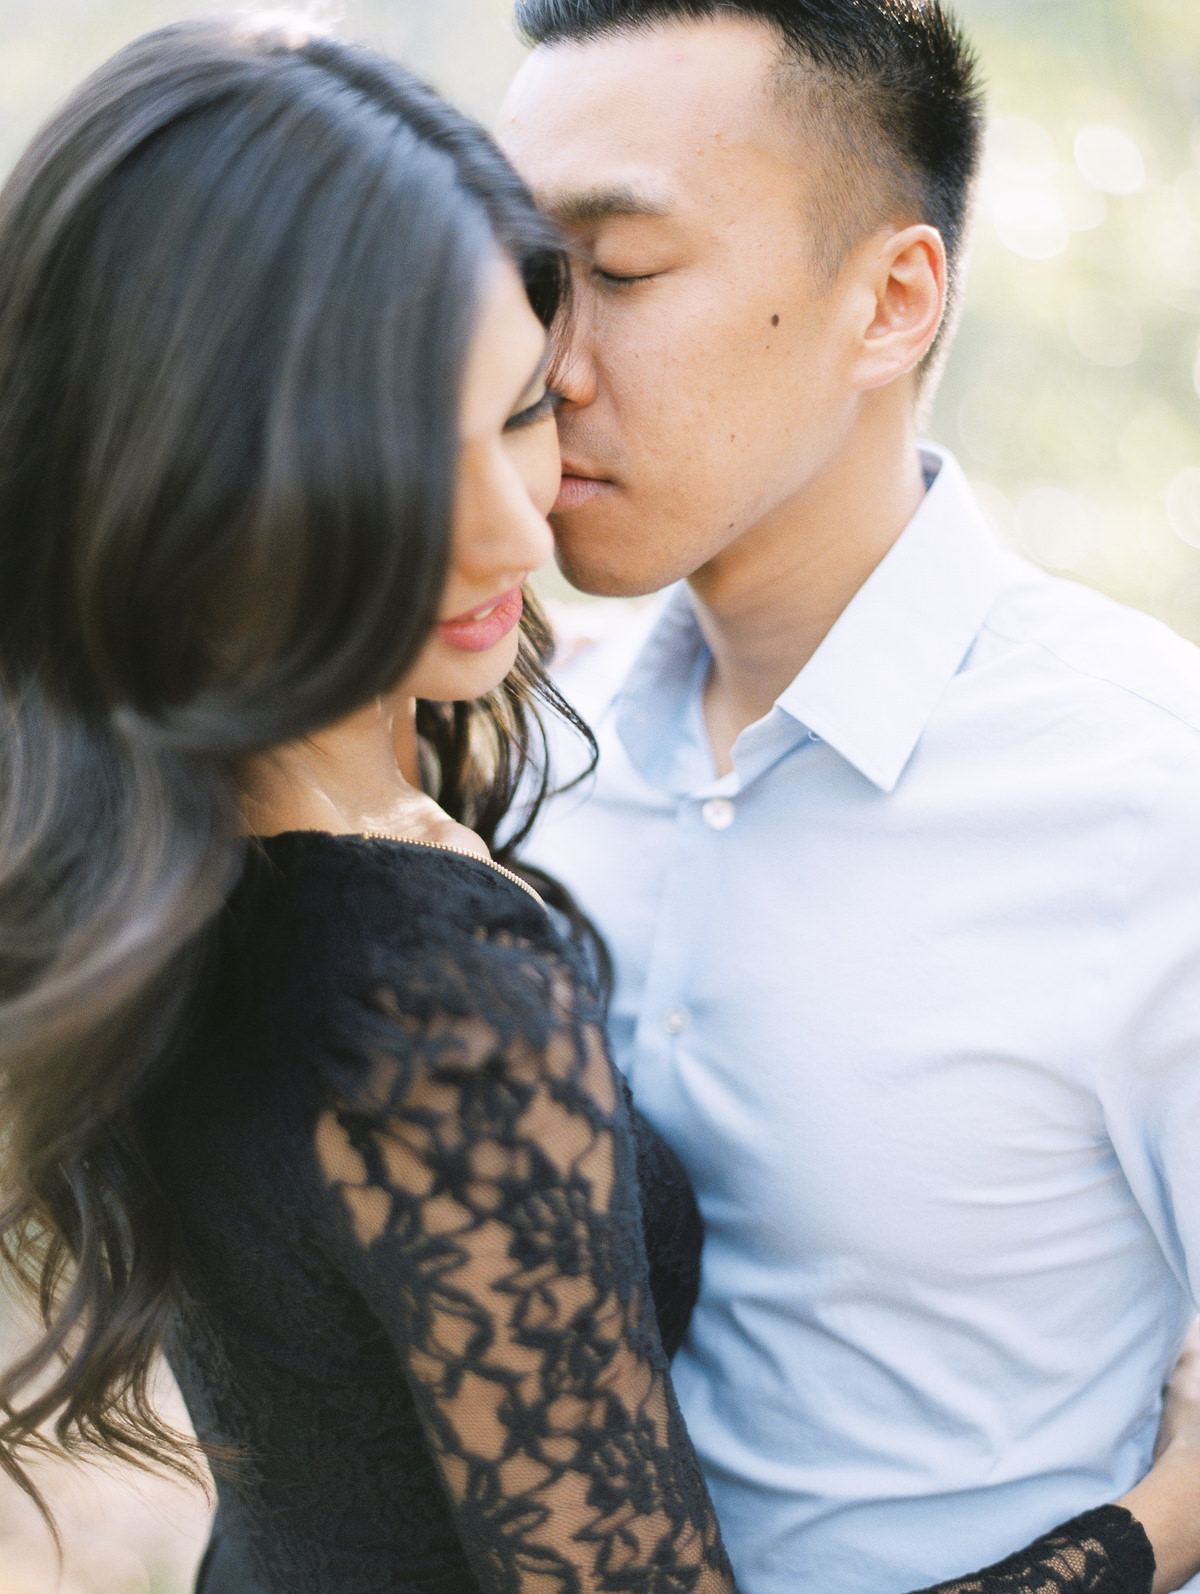 southern-california-beach-wedding-engagement-photography (4)